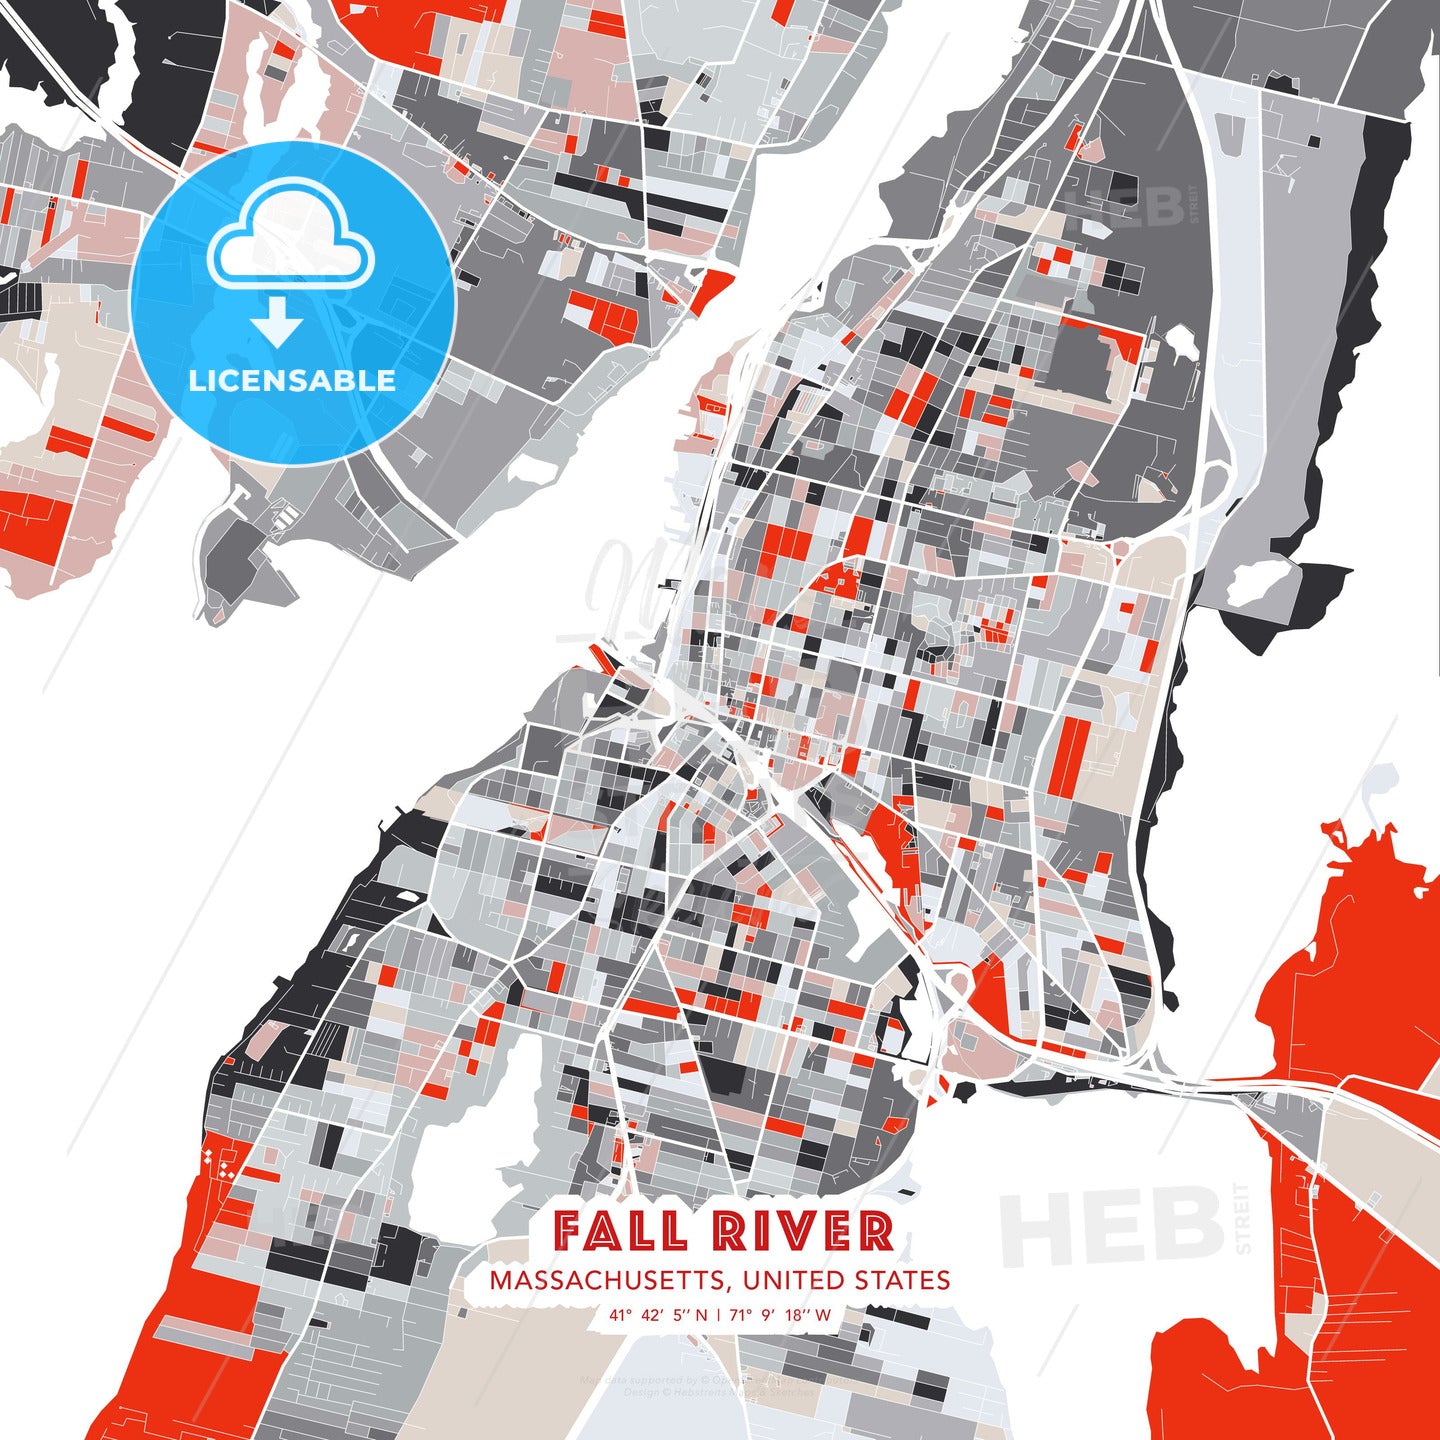 Fall River, Massachusetts, United States, modern map - HEBSTREITS Sketches